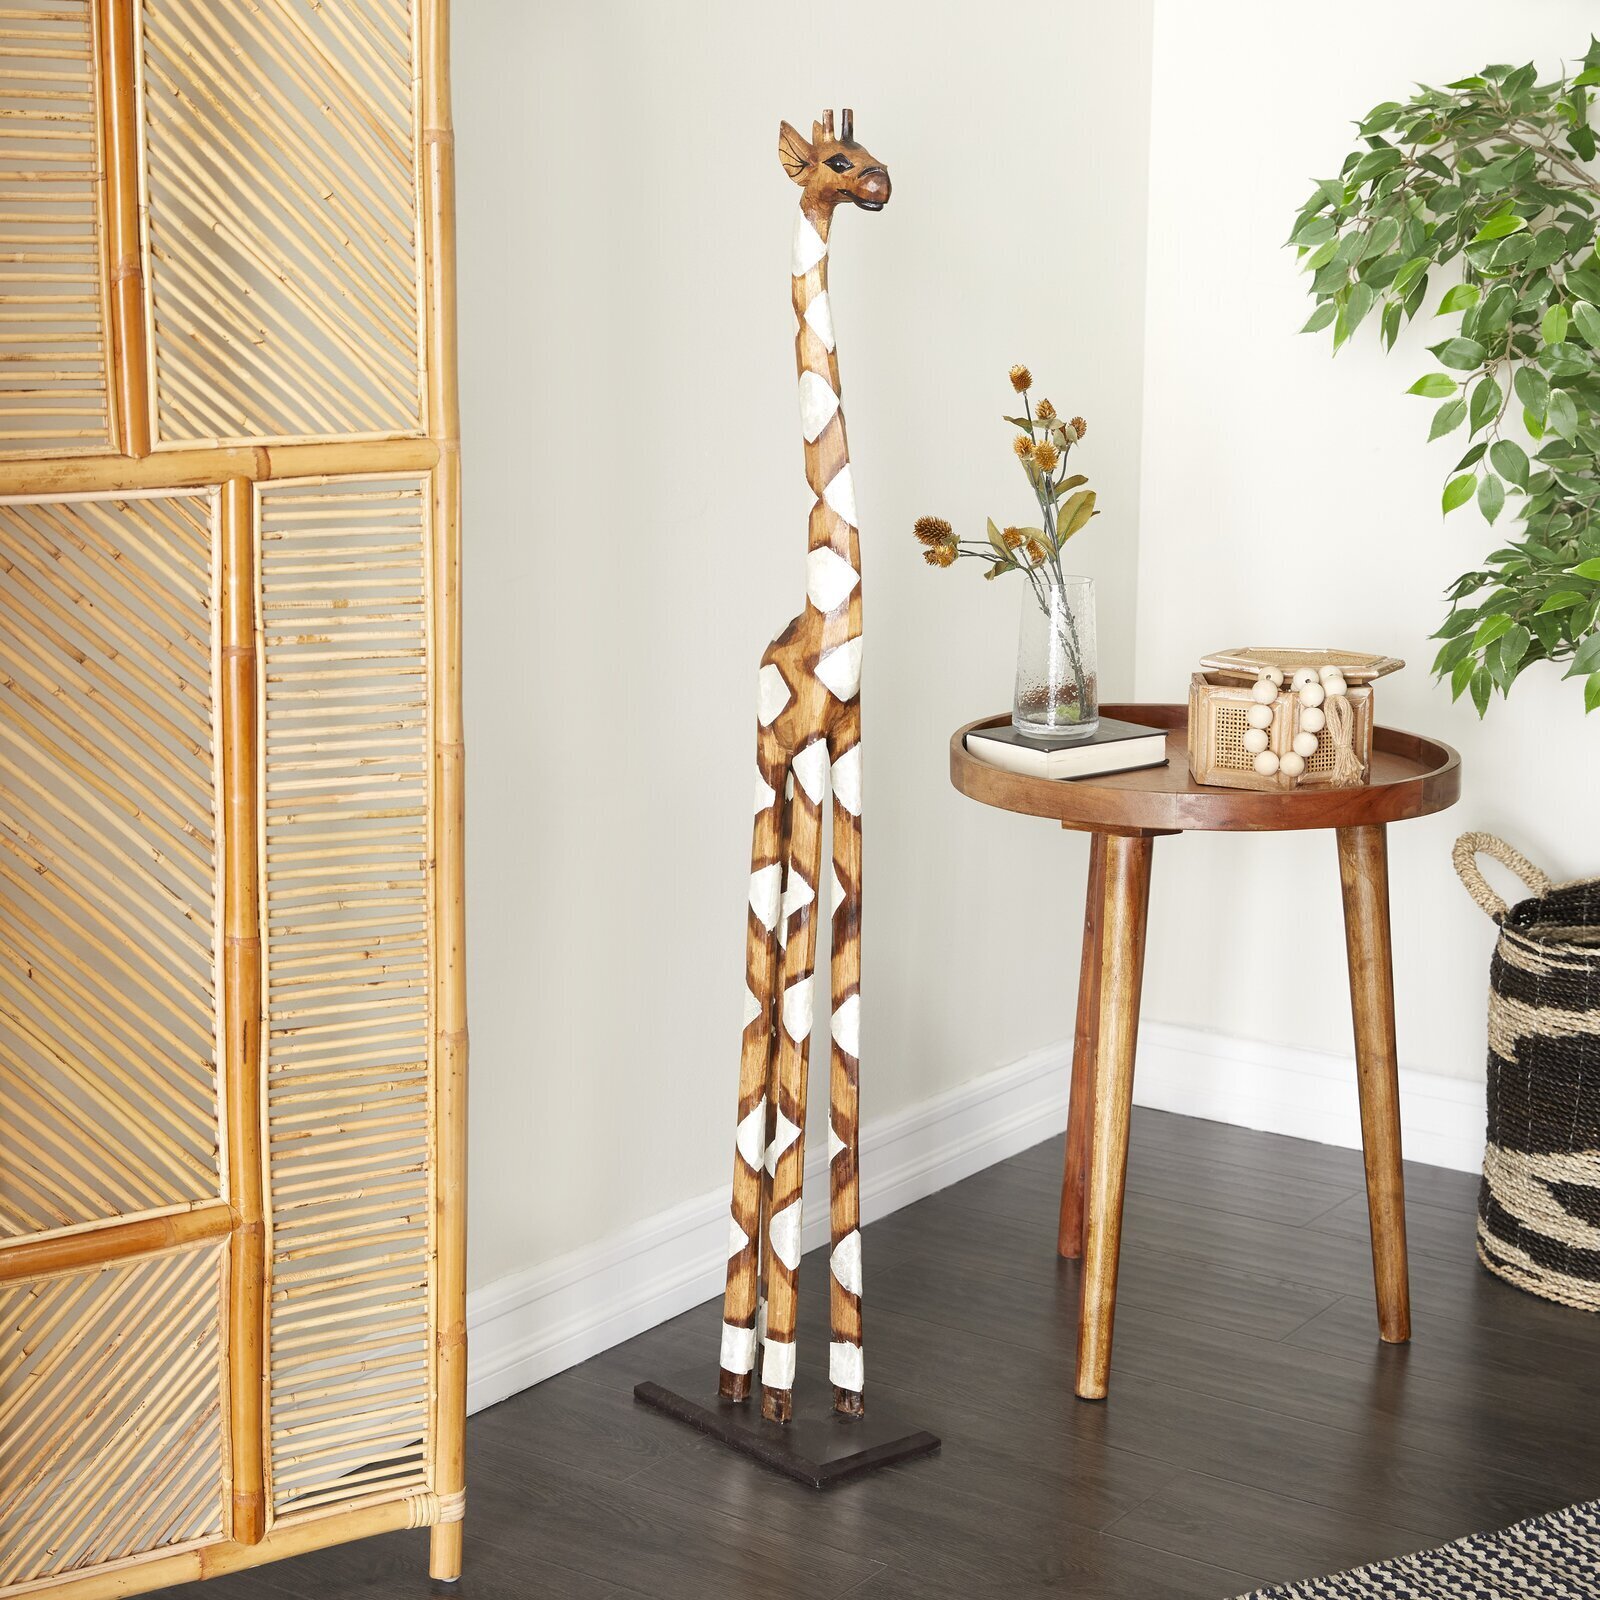 4ft Wooden Giraffe with Calico Color